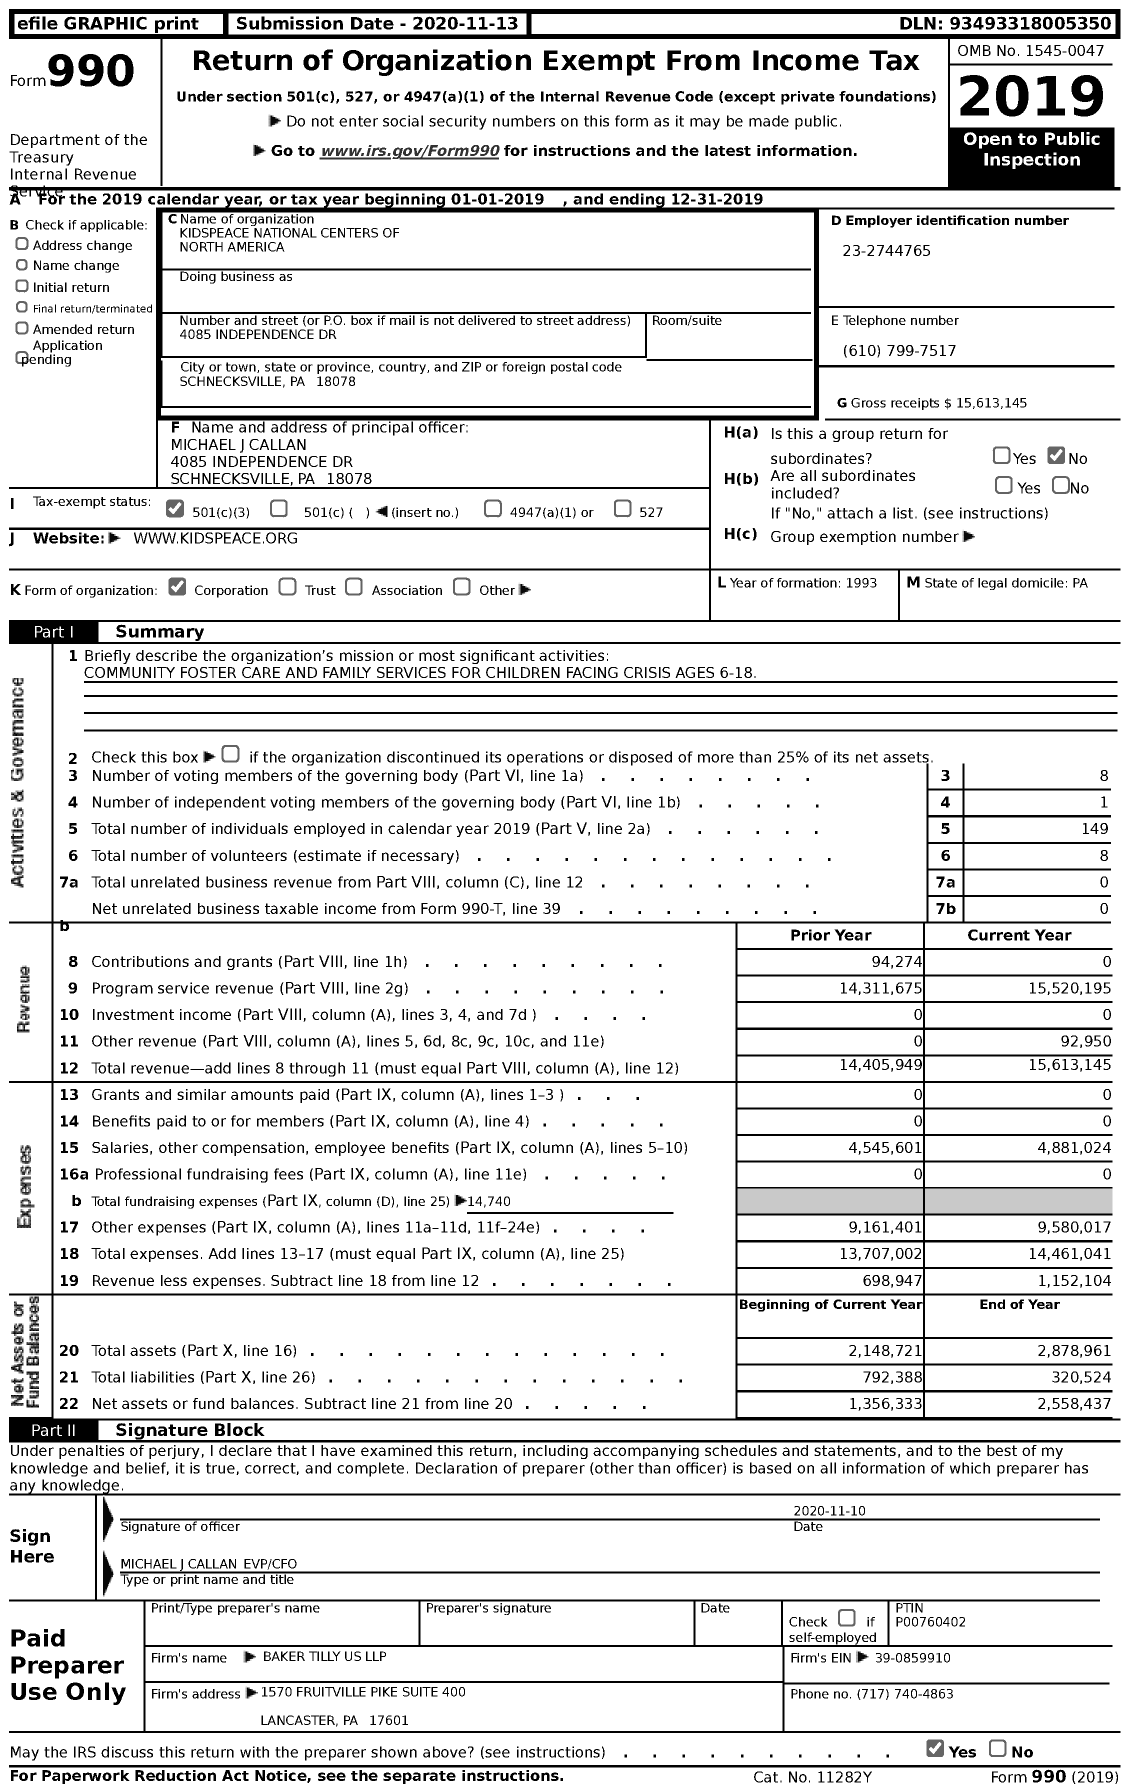 Image of first page of 2019 Form 990 for KidsPeace National Centers of North America